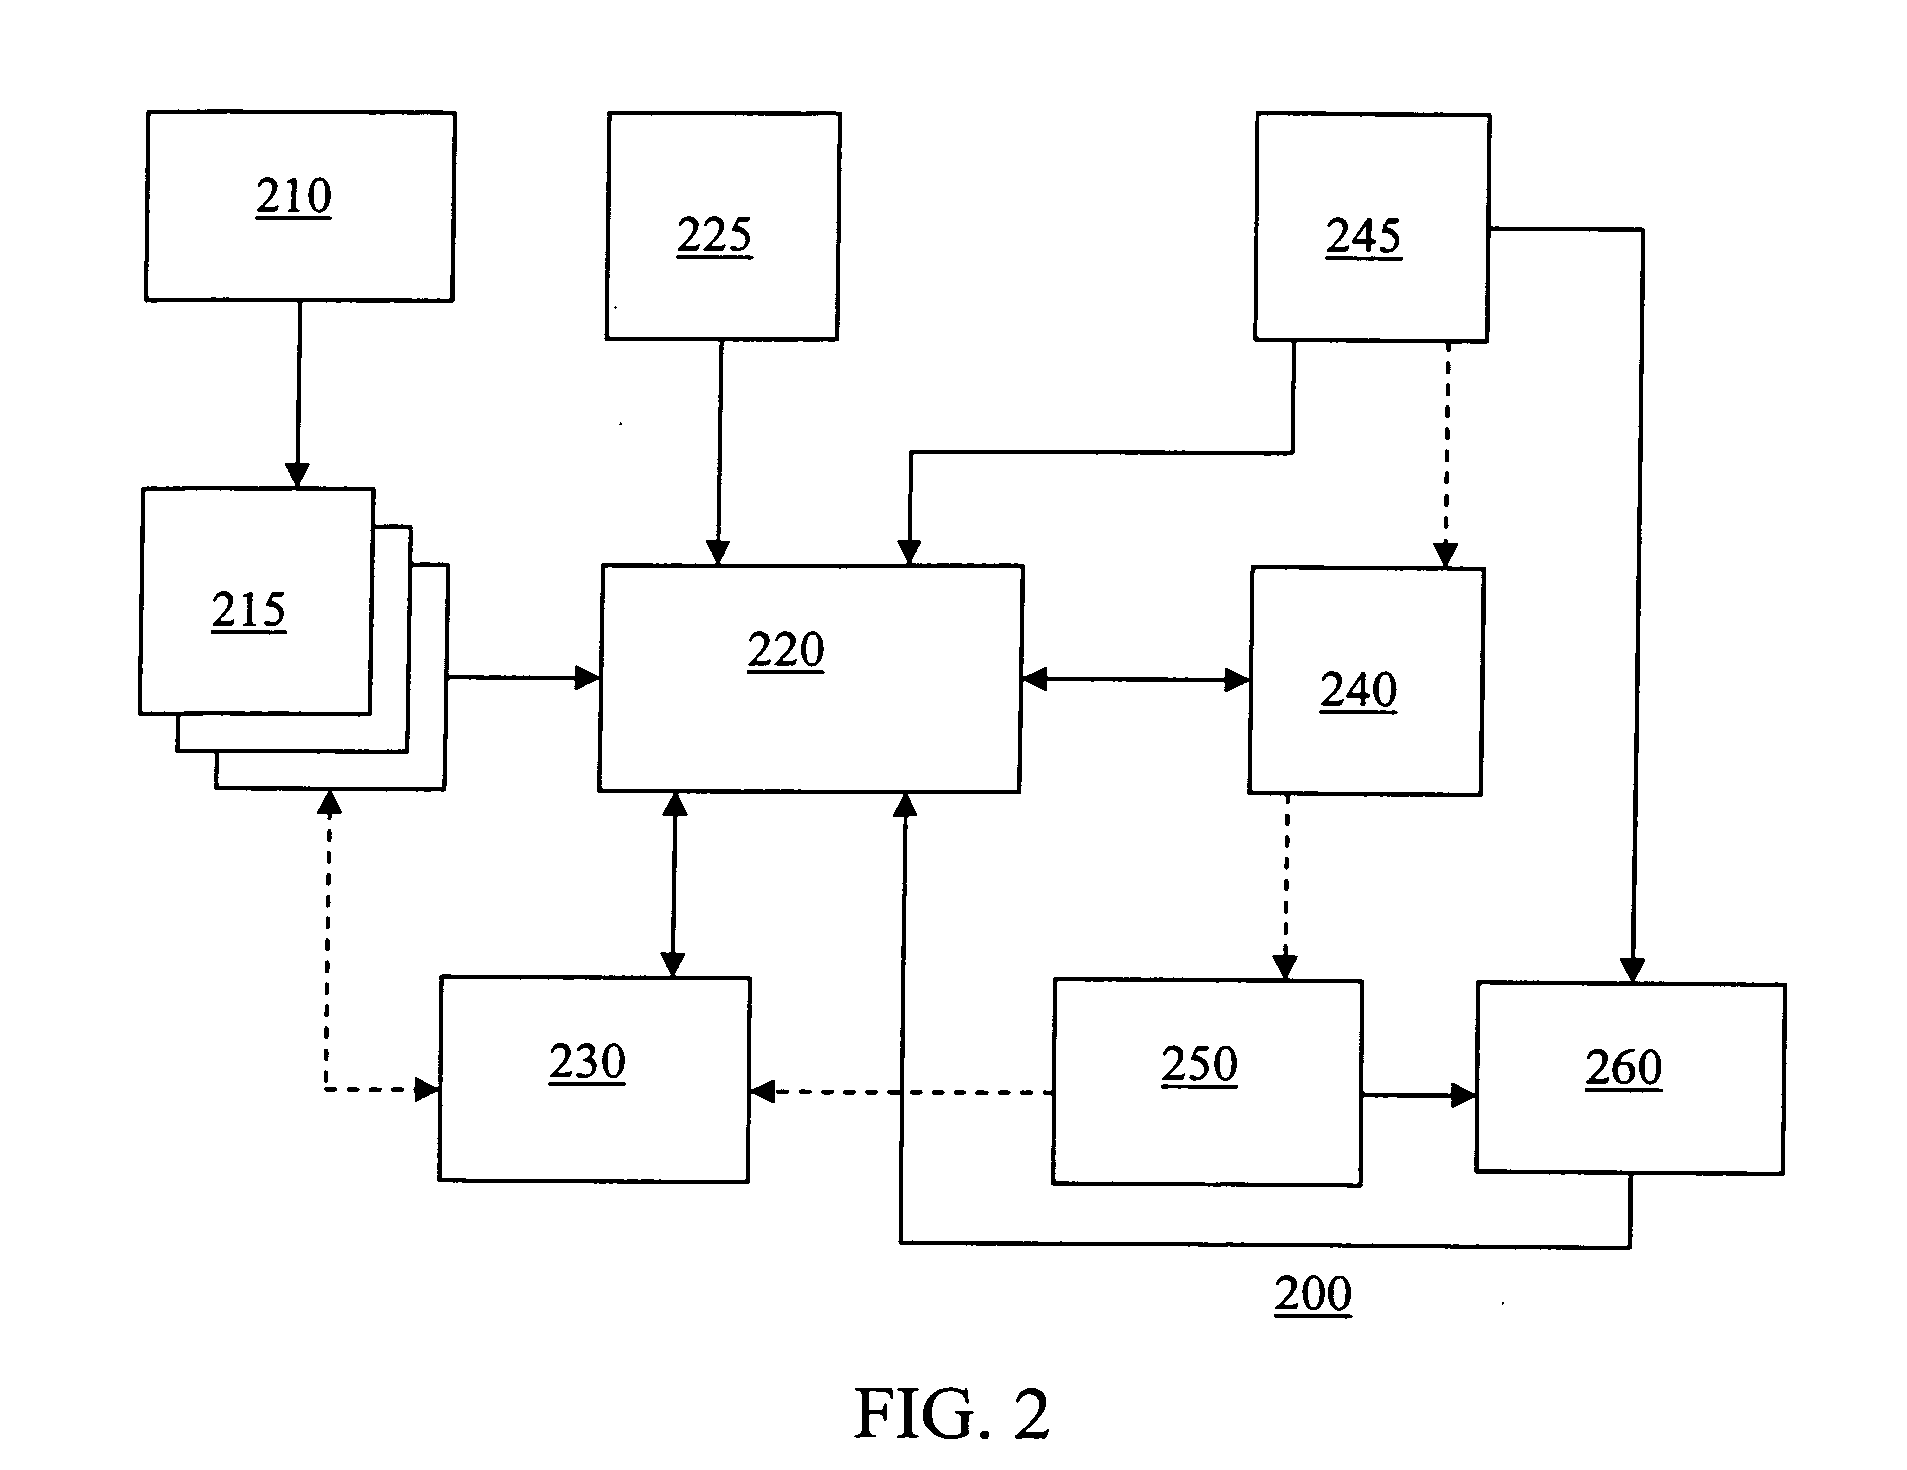 R2R controller to automate the data collection during a DOE